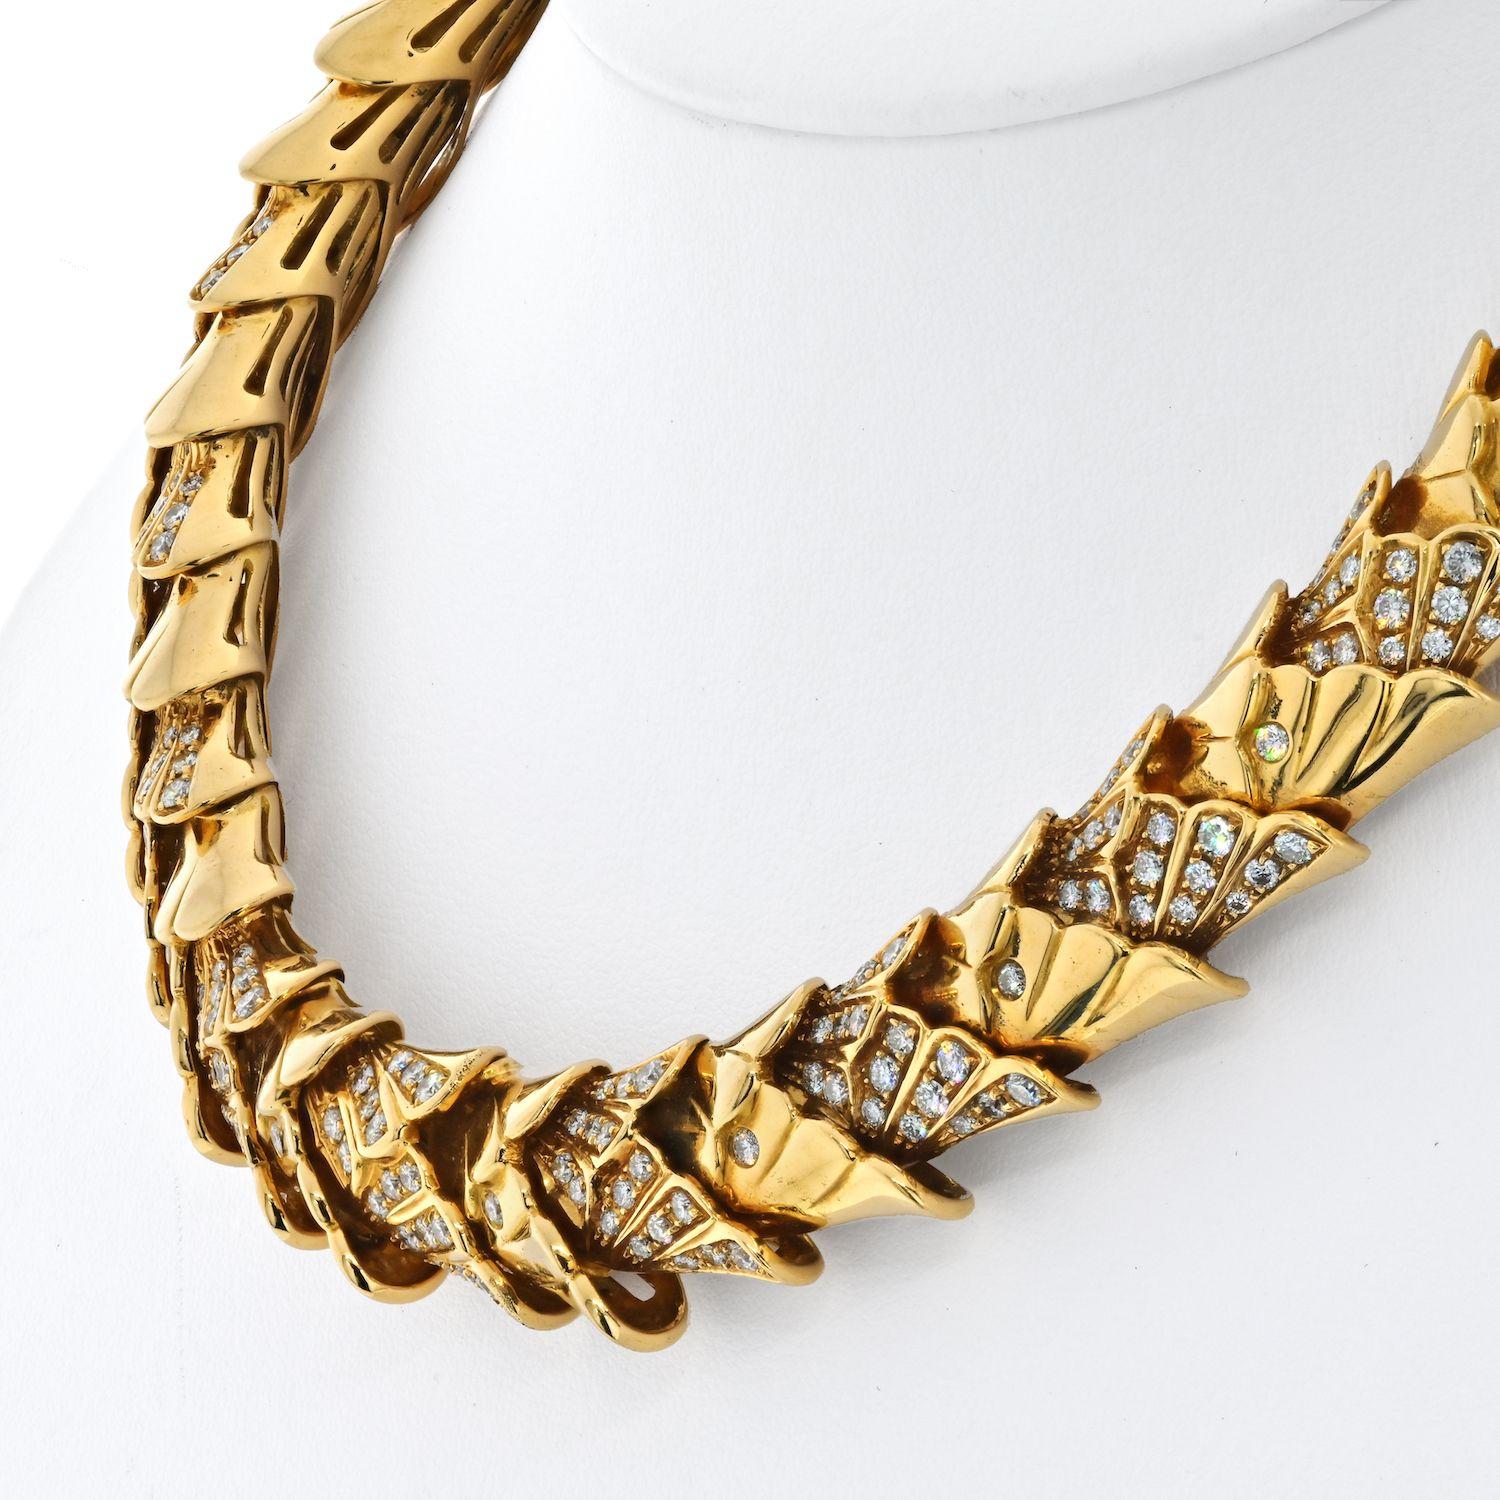 Elegant and sophisticated, this 18k gold necklace is exceptionally flexible, allowing it to sit beautifully on the neck. The necklace is generously sized at 15mm wide and constructed of individual links assembled with diamond set scale like design.